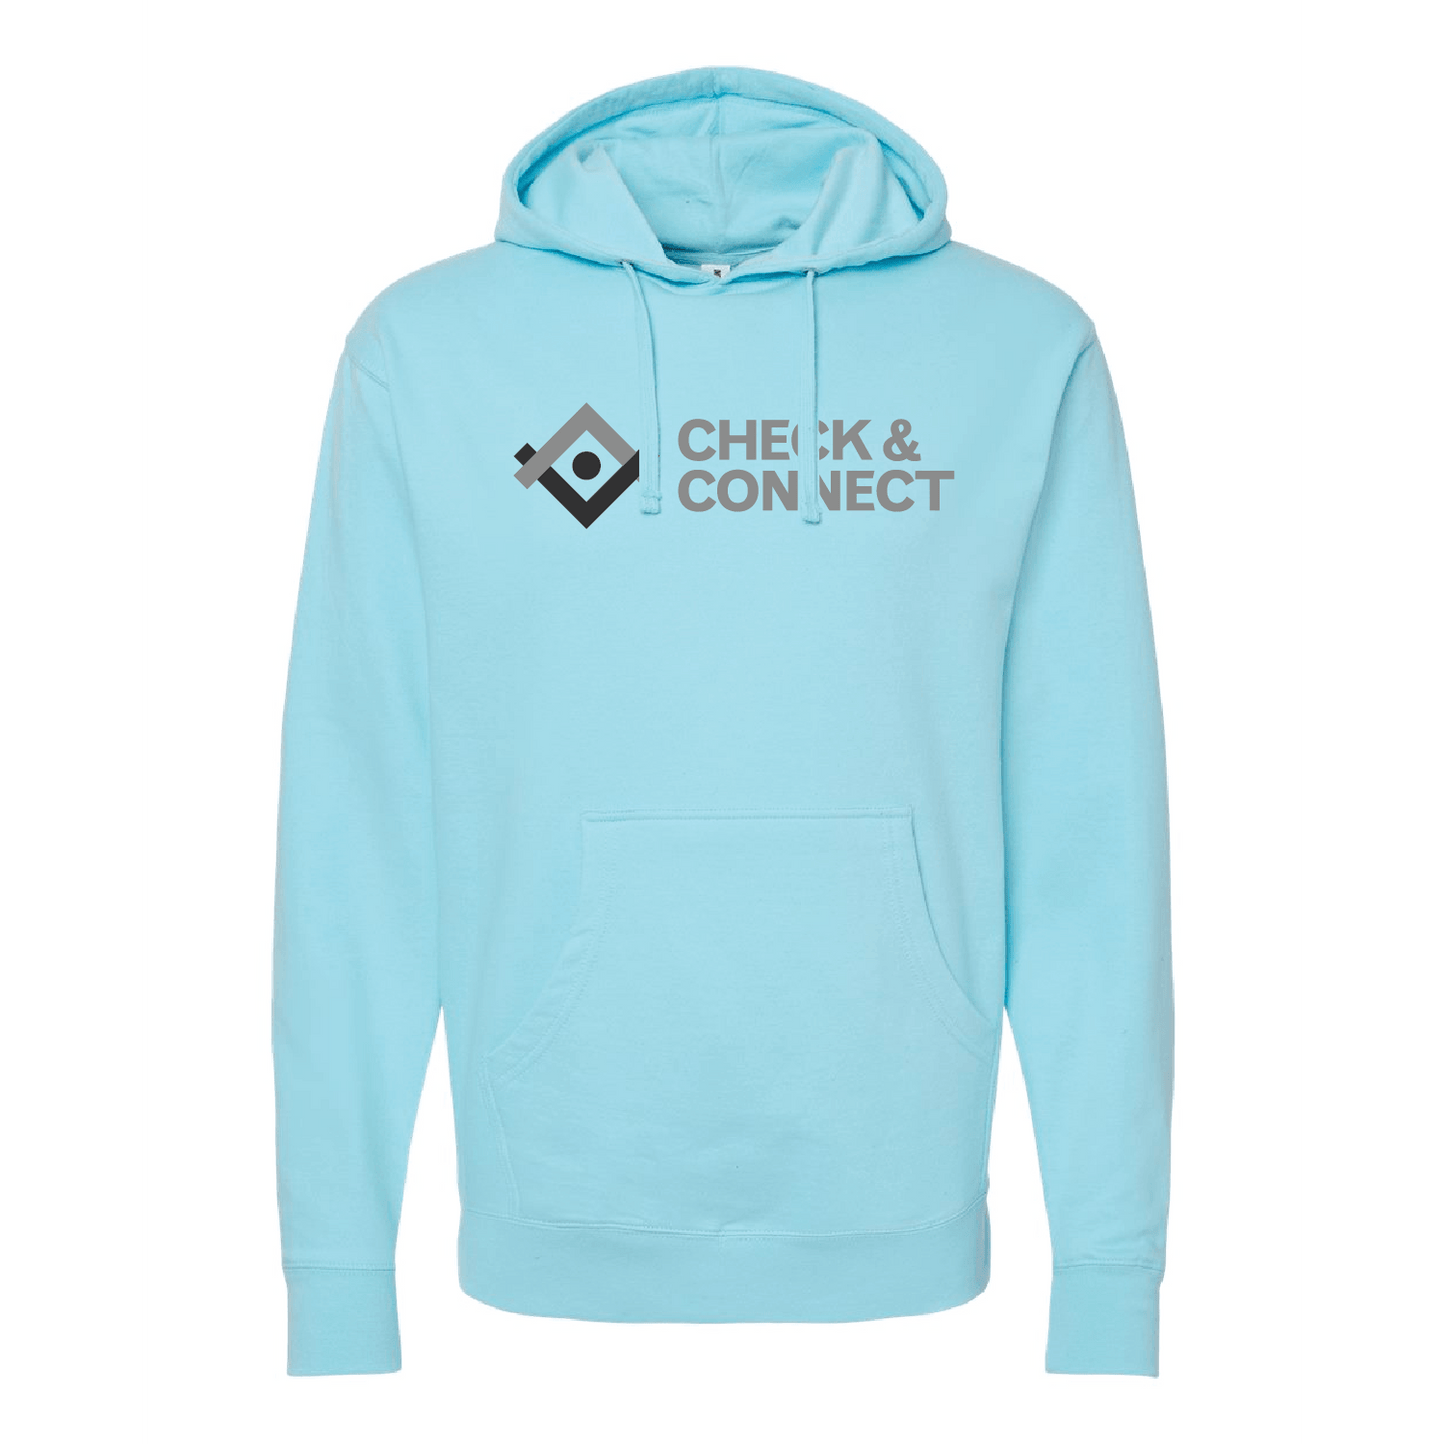 Check and Connect Unisex Midweight Hooded Sweatshirt - DSP On Demand